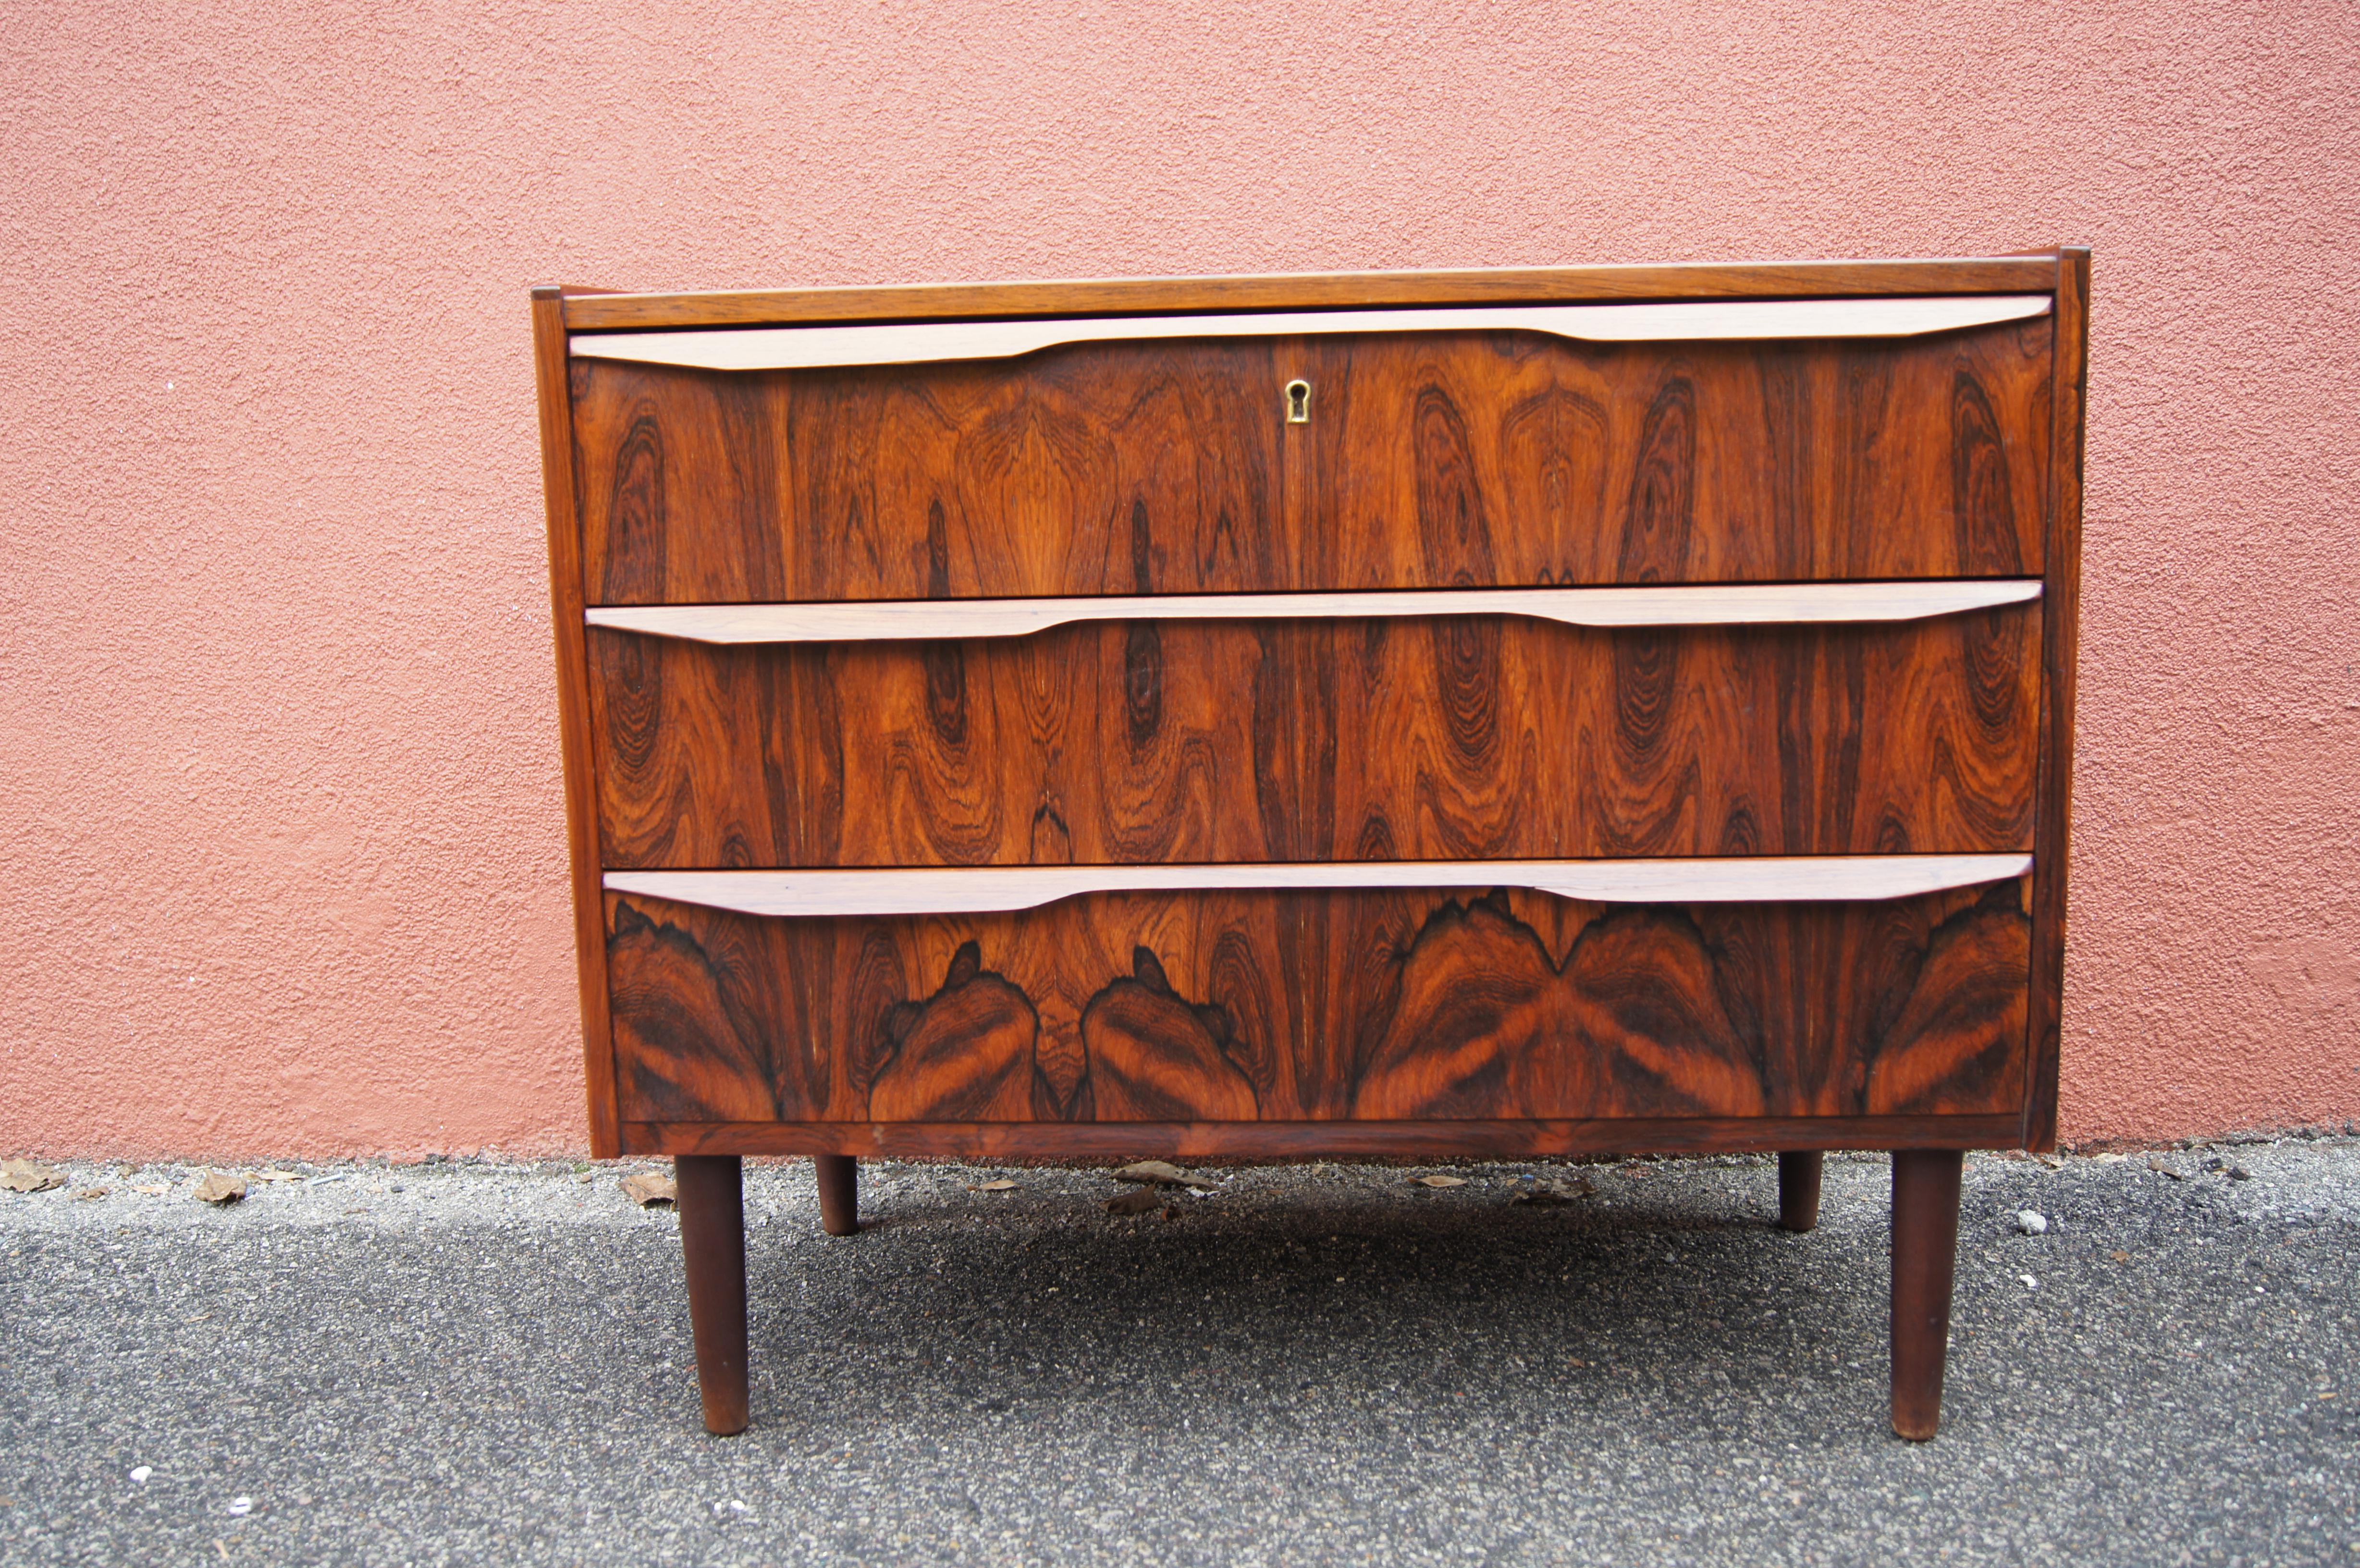 This handsome Danish modern chest features a vivid rosewood grain. Sculpted pulls extend across the width of its three drawers.

Comes with a working key.